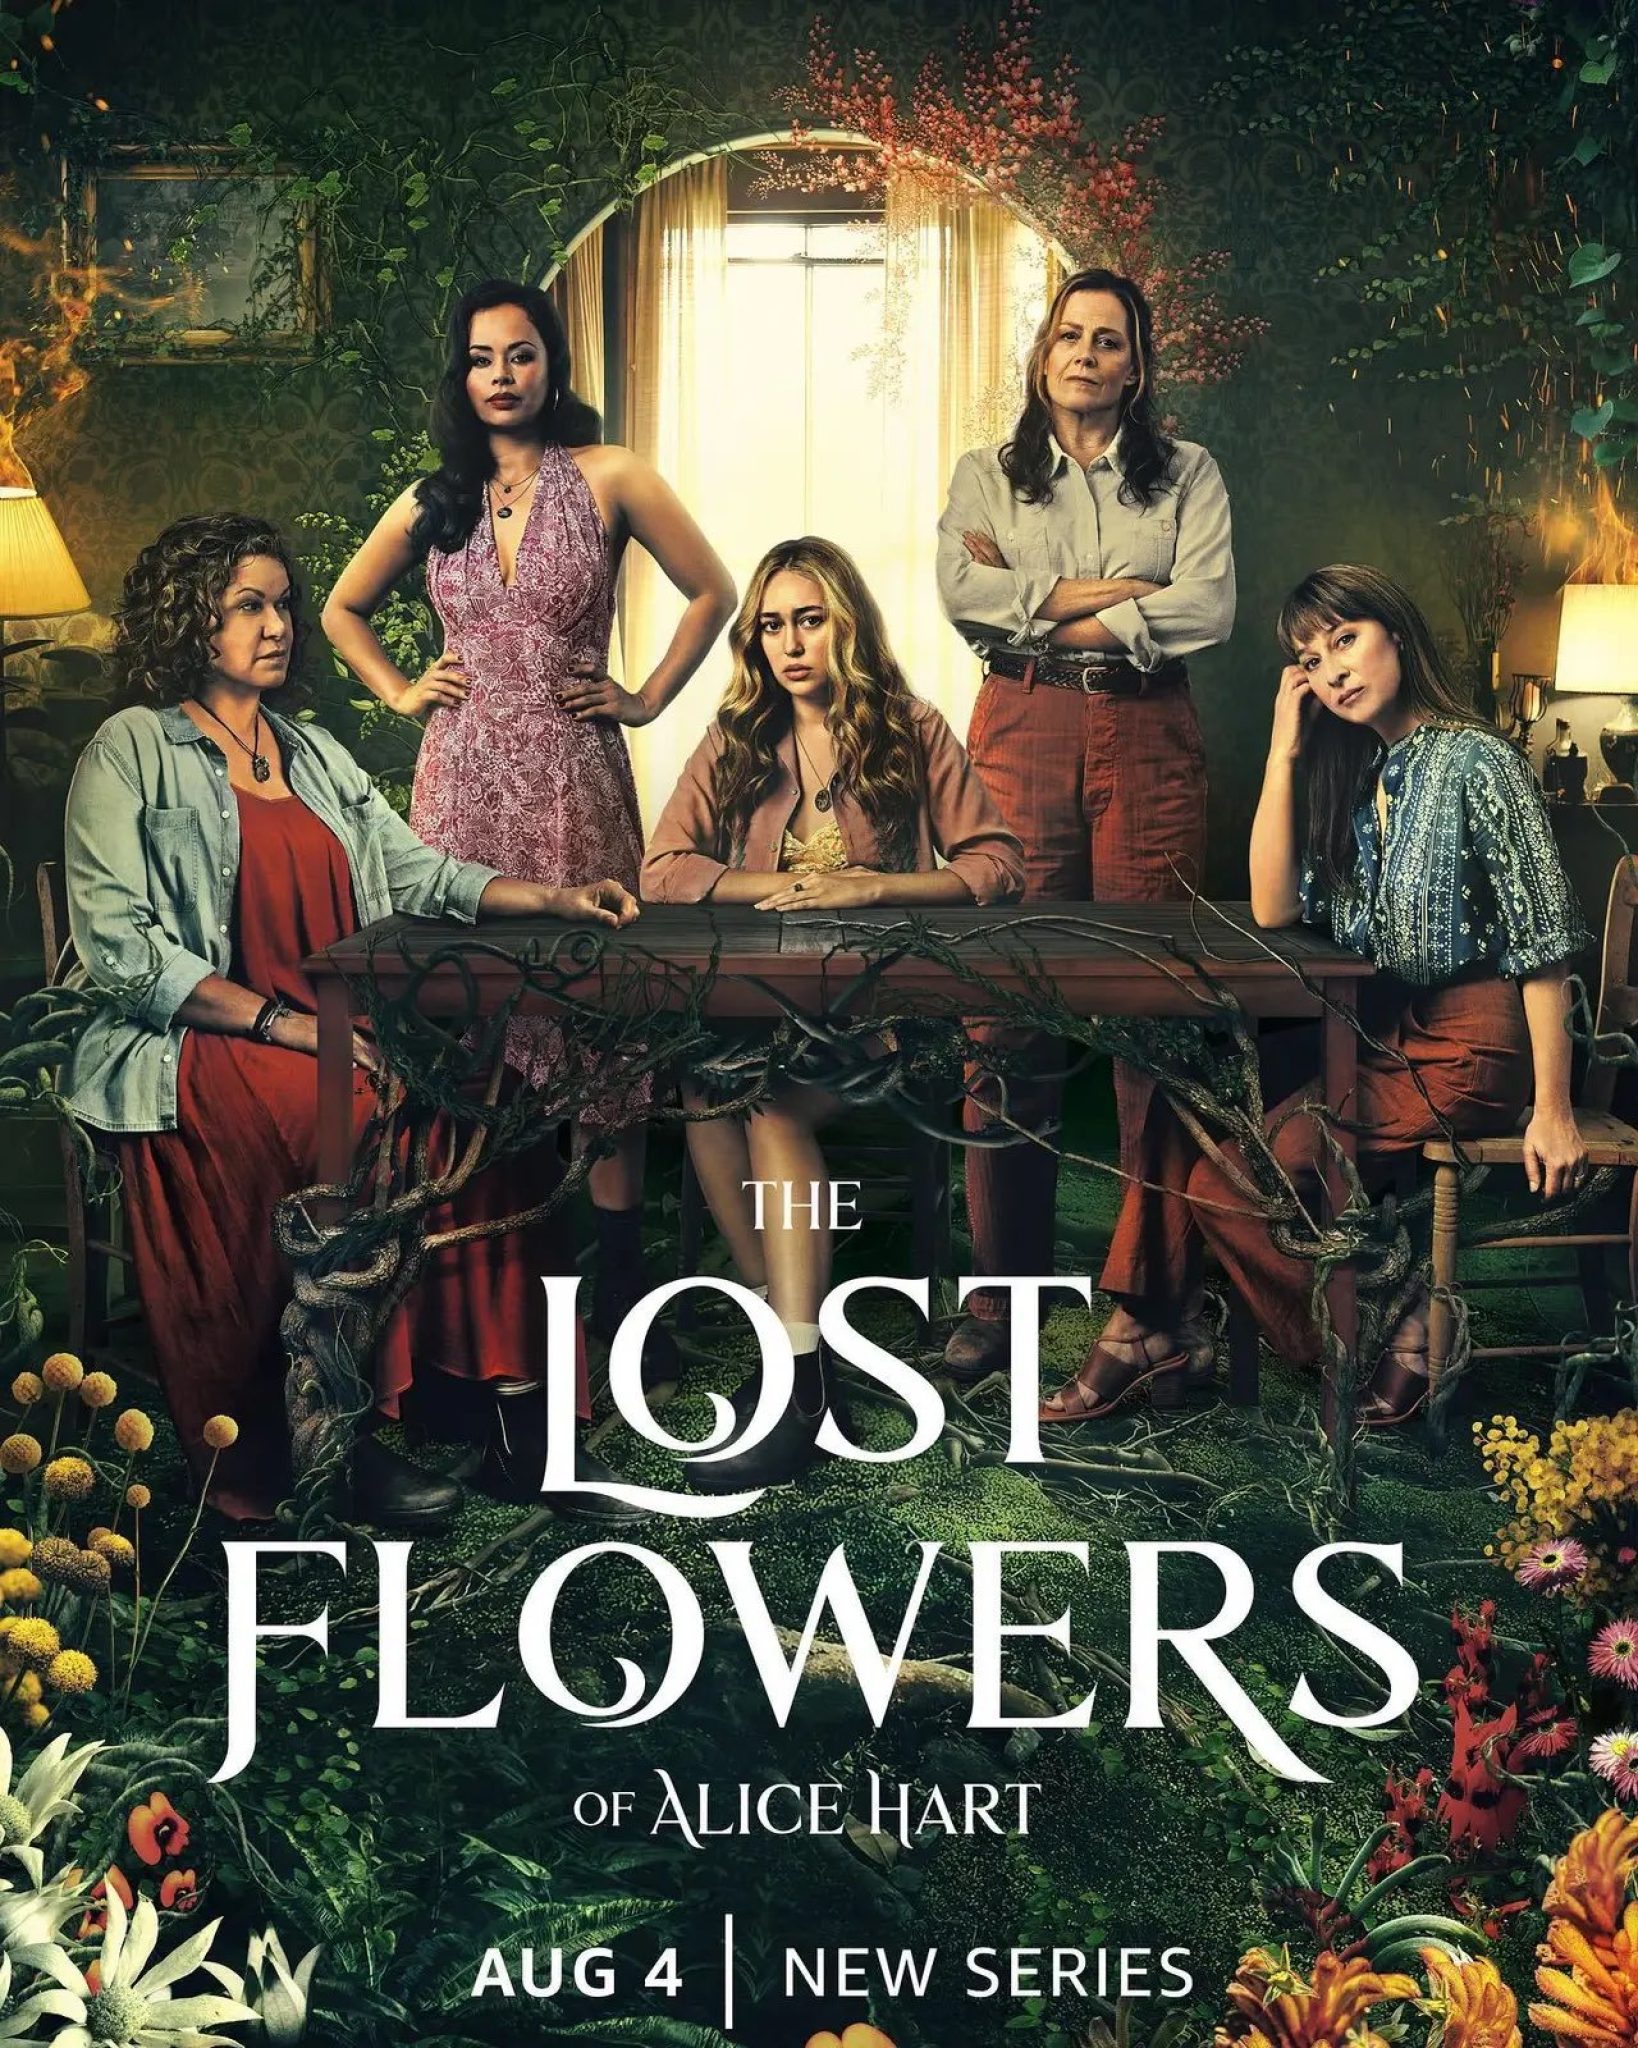 The-Lost-Flowers-of-Alice-Hart-Poster-16